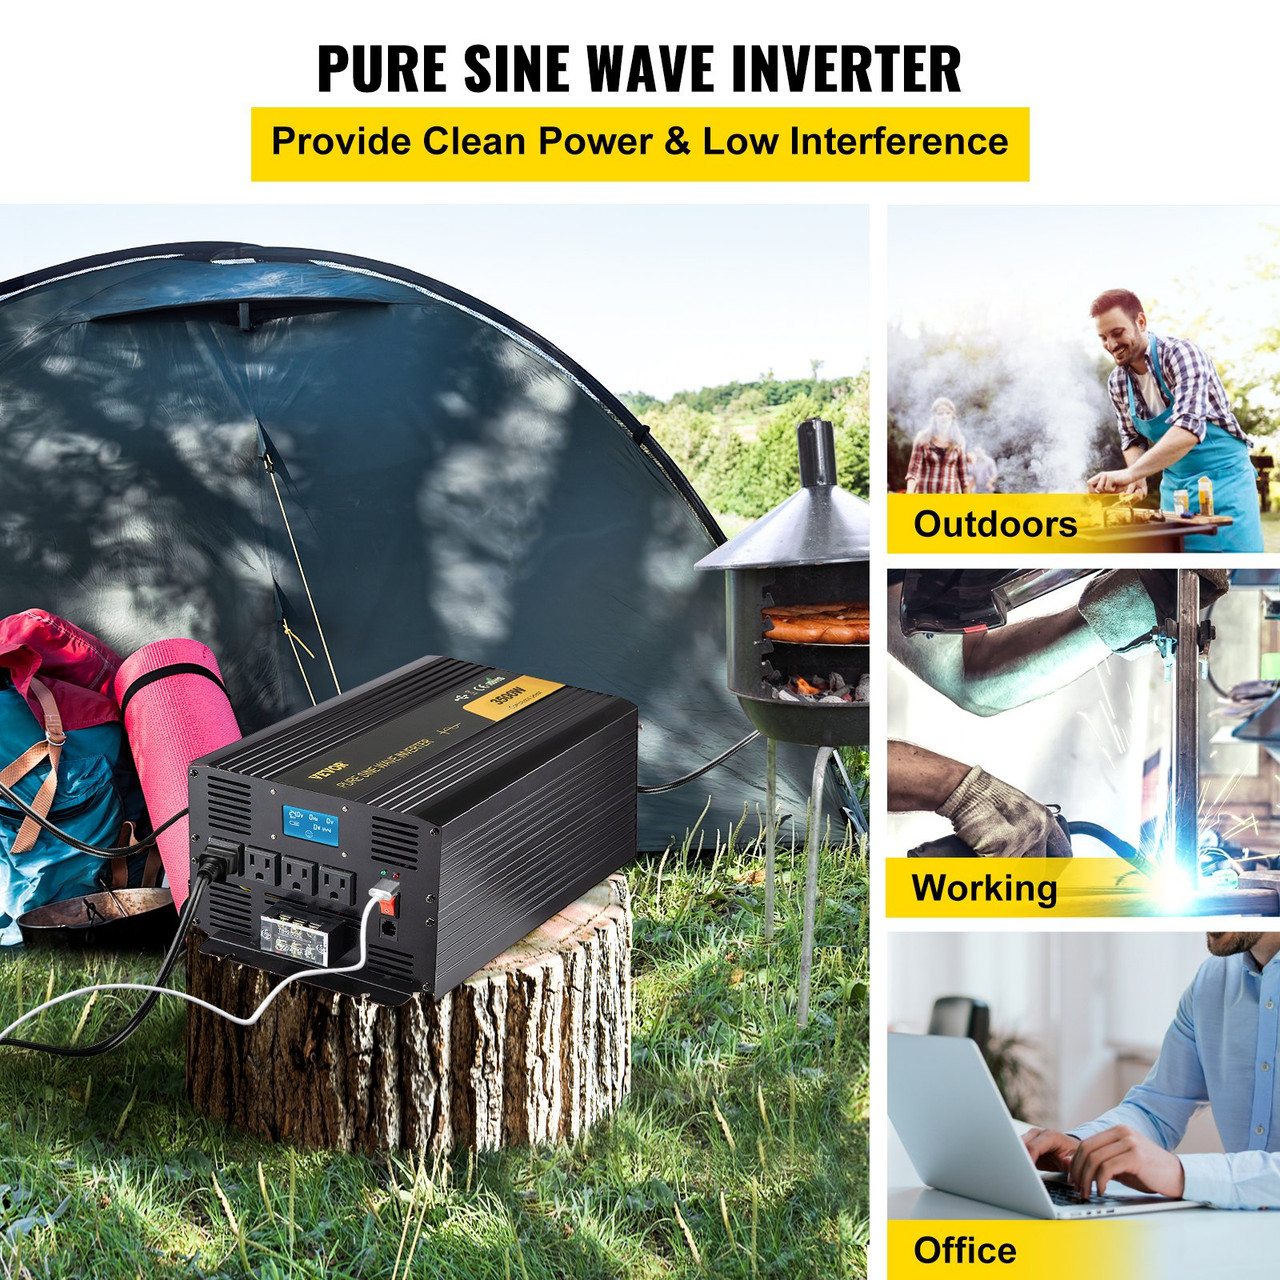 Pure Sine Wave Inverter, 3500 Watt Power Inverter, DC 24V to AC 120V Car Inverter, with USB Port, LCD Display, and Remote Controller Power Converter, for RV Truck Car Solar System Travel Camping